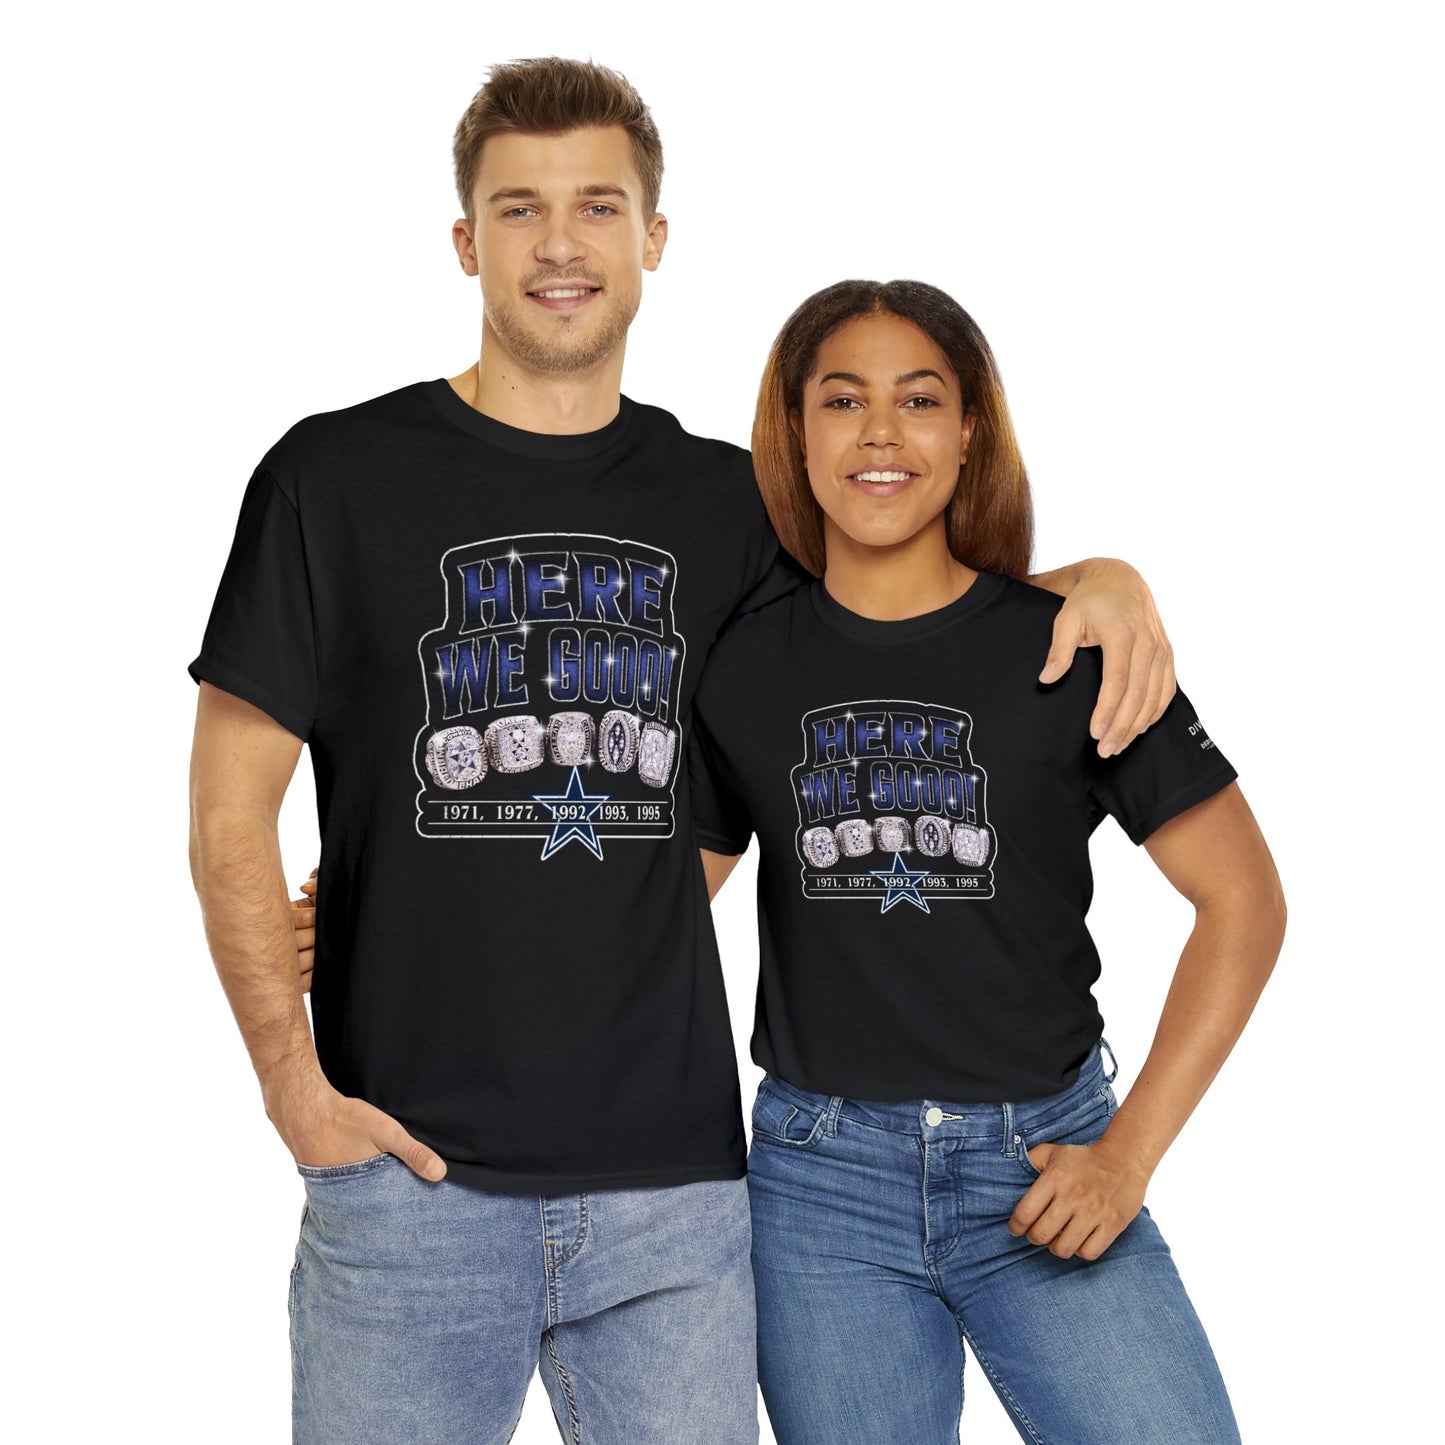 Here We Go Super Bowl Ring T-shirt